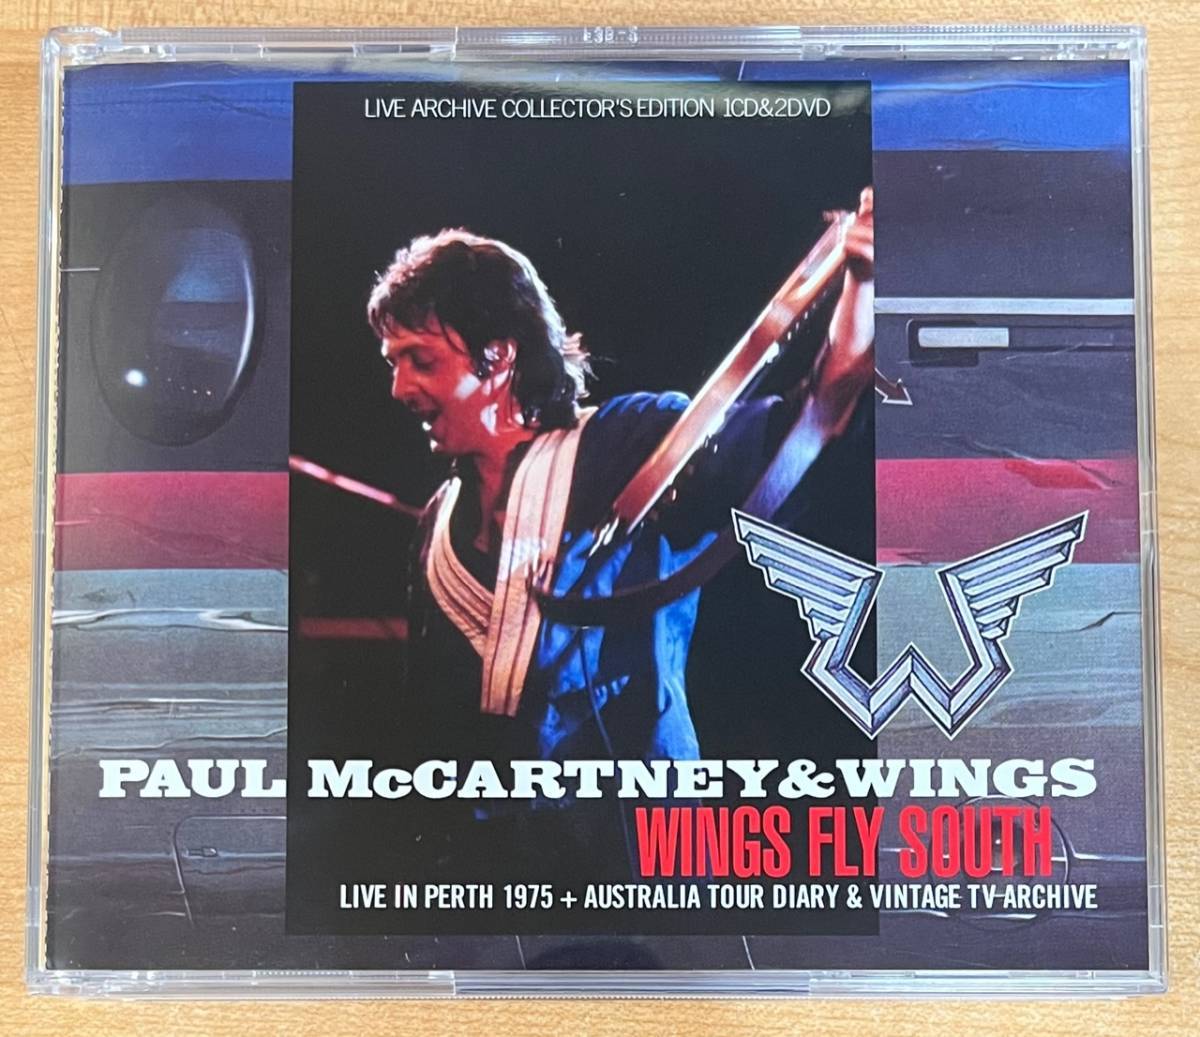 [1CD+2DVD] PAUL McCARTNEY&WINGS / WINGS FLY SOUTH - LIVE IN PERTH 1975 + AUSTRALIA TOUR DIARY&VINTAGE TV ARCHIVE_画像1